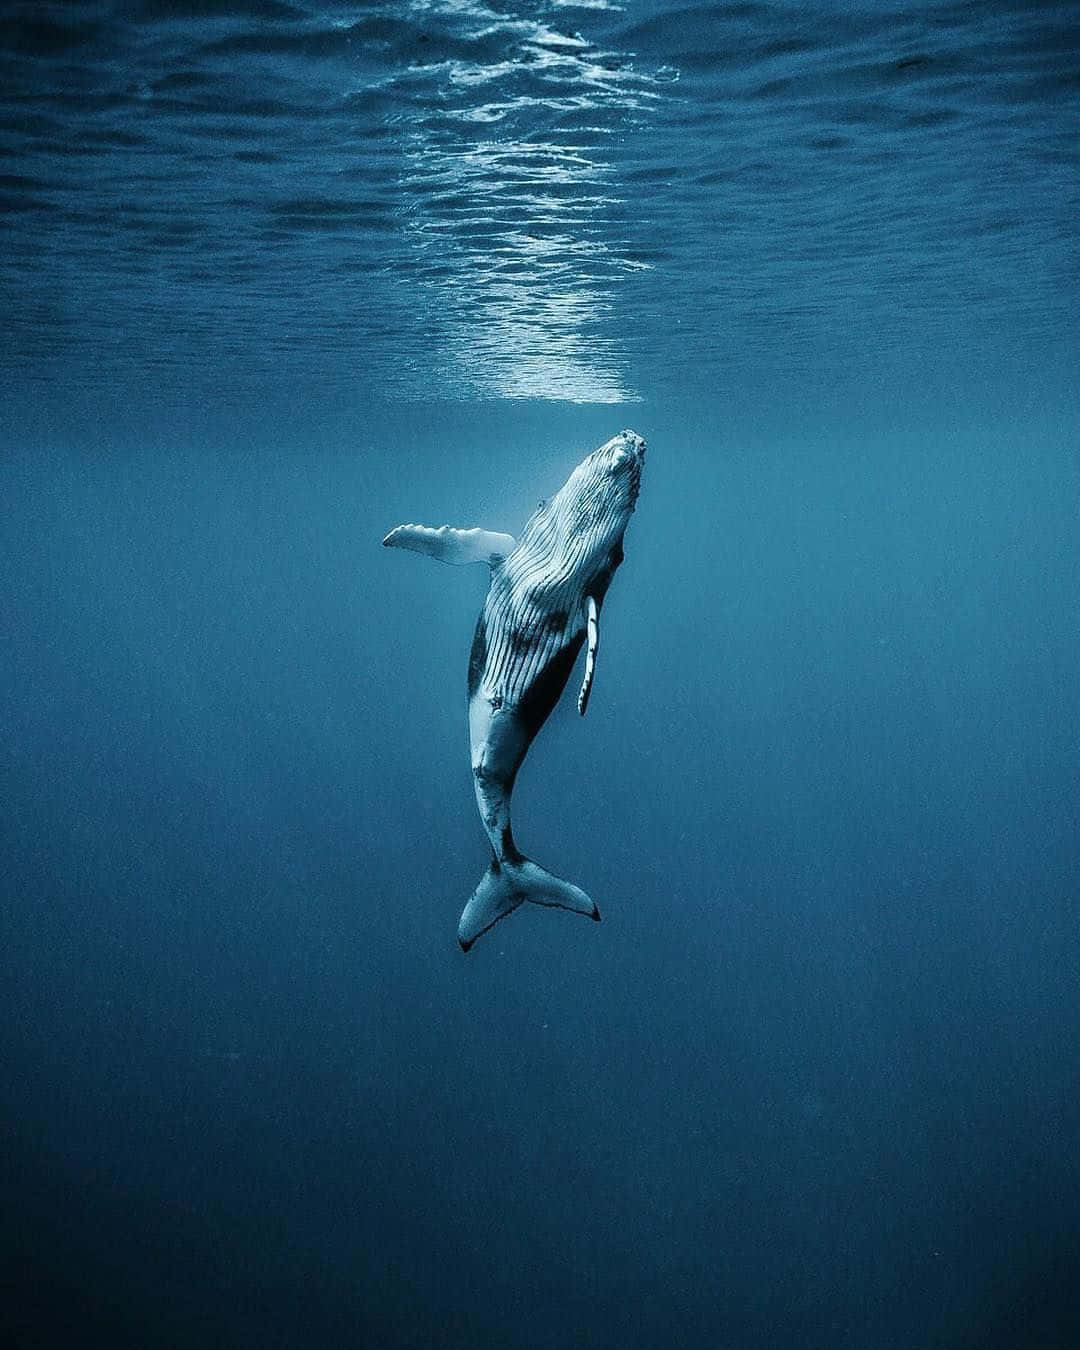 A Humpback Whale Swimming In The Ocean